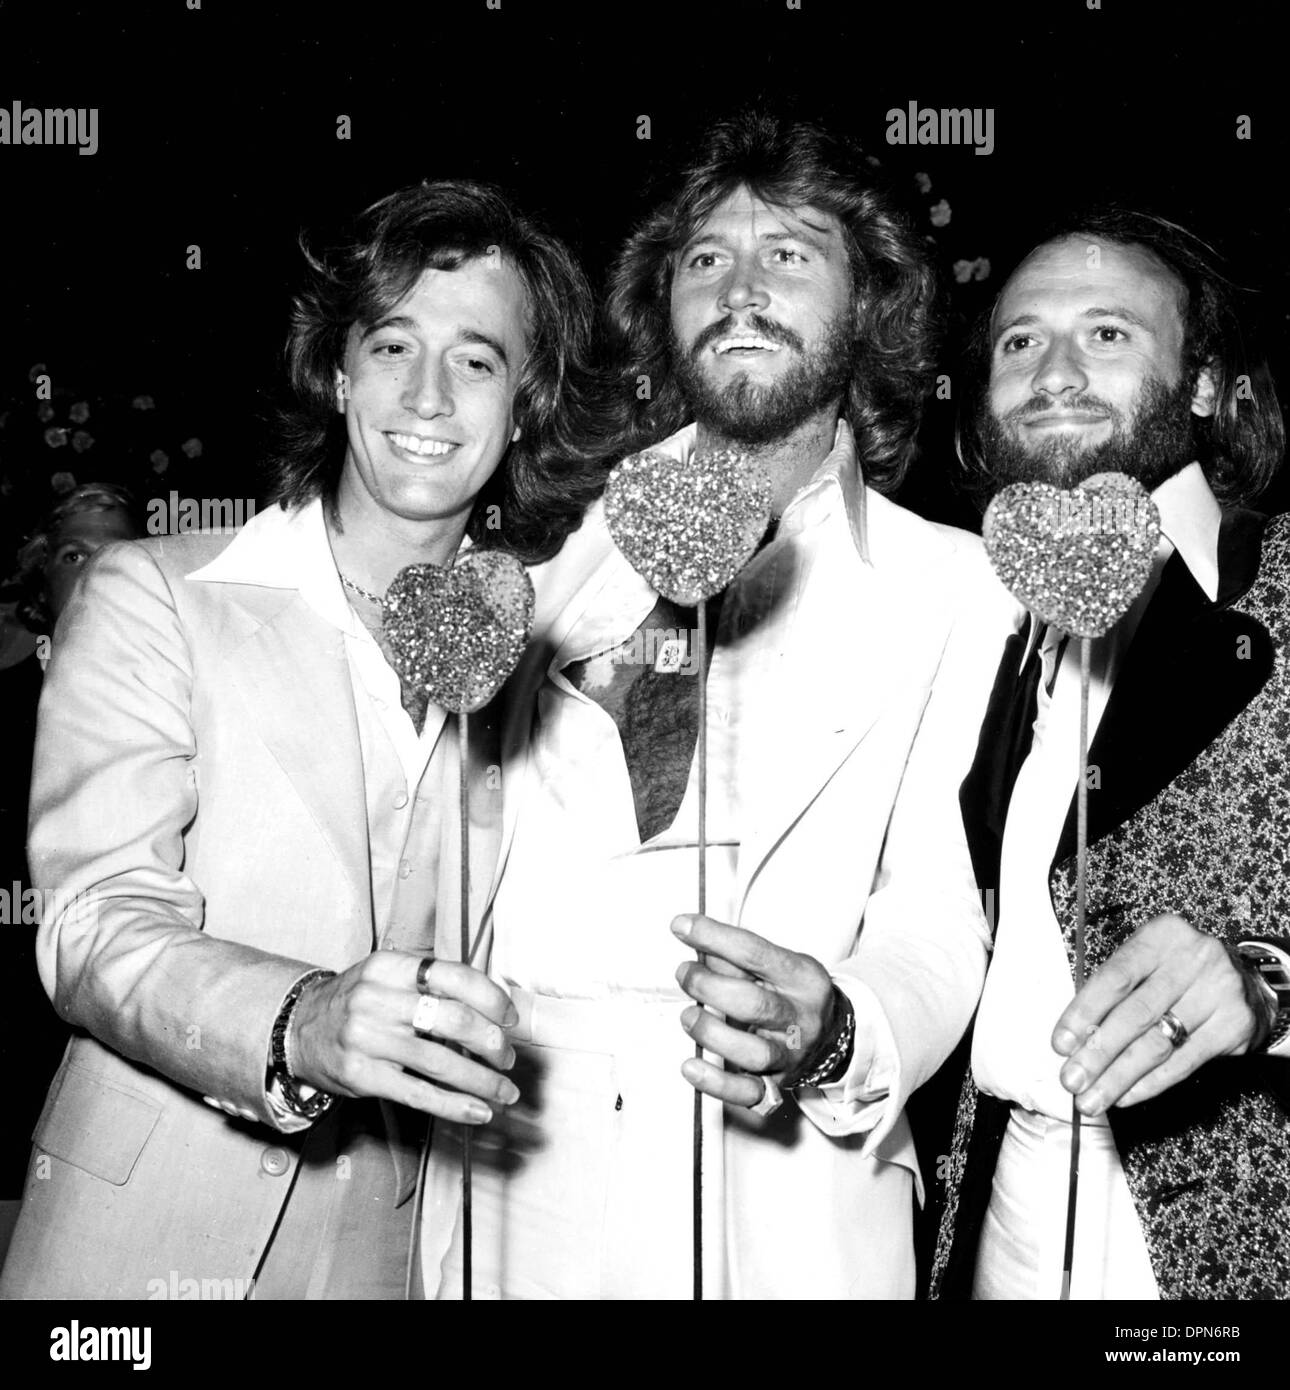 Barry gibb Black and White Stock Photos & Images - Alamy